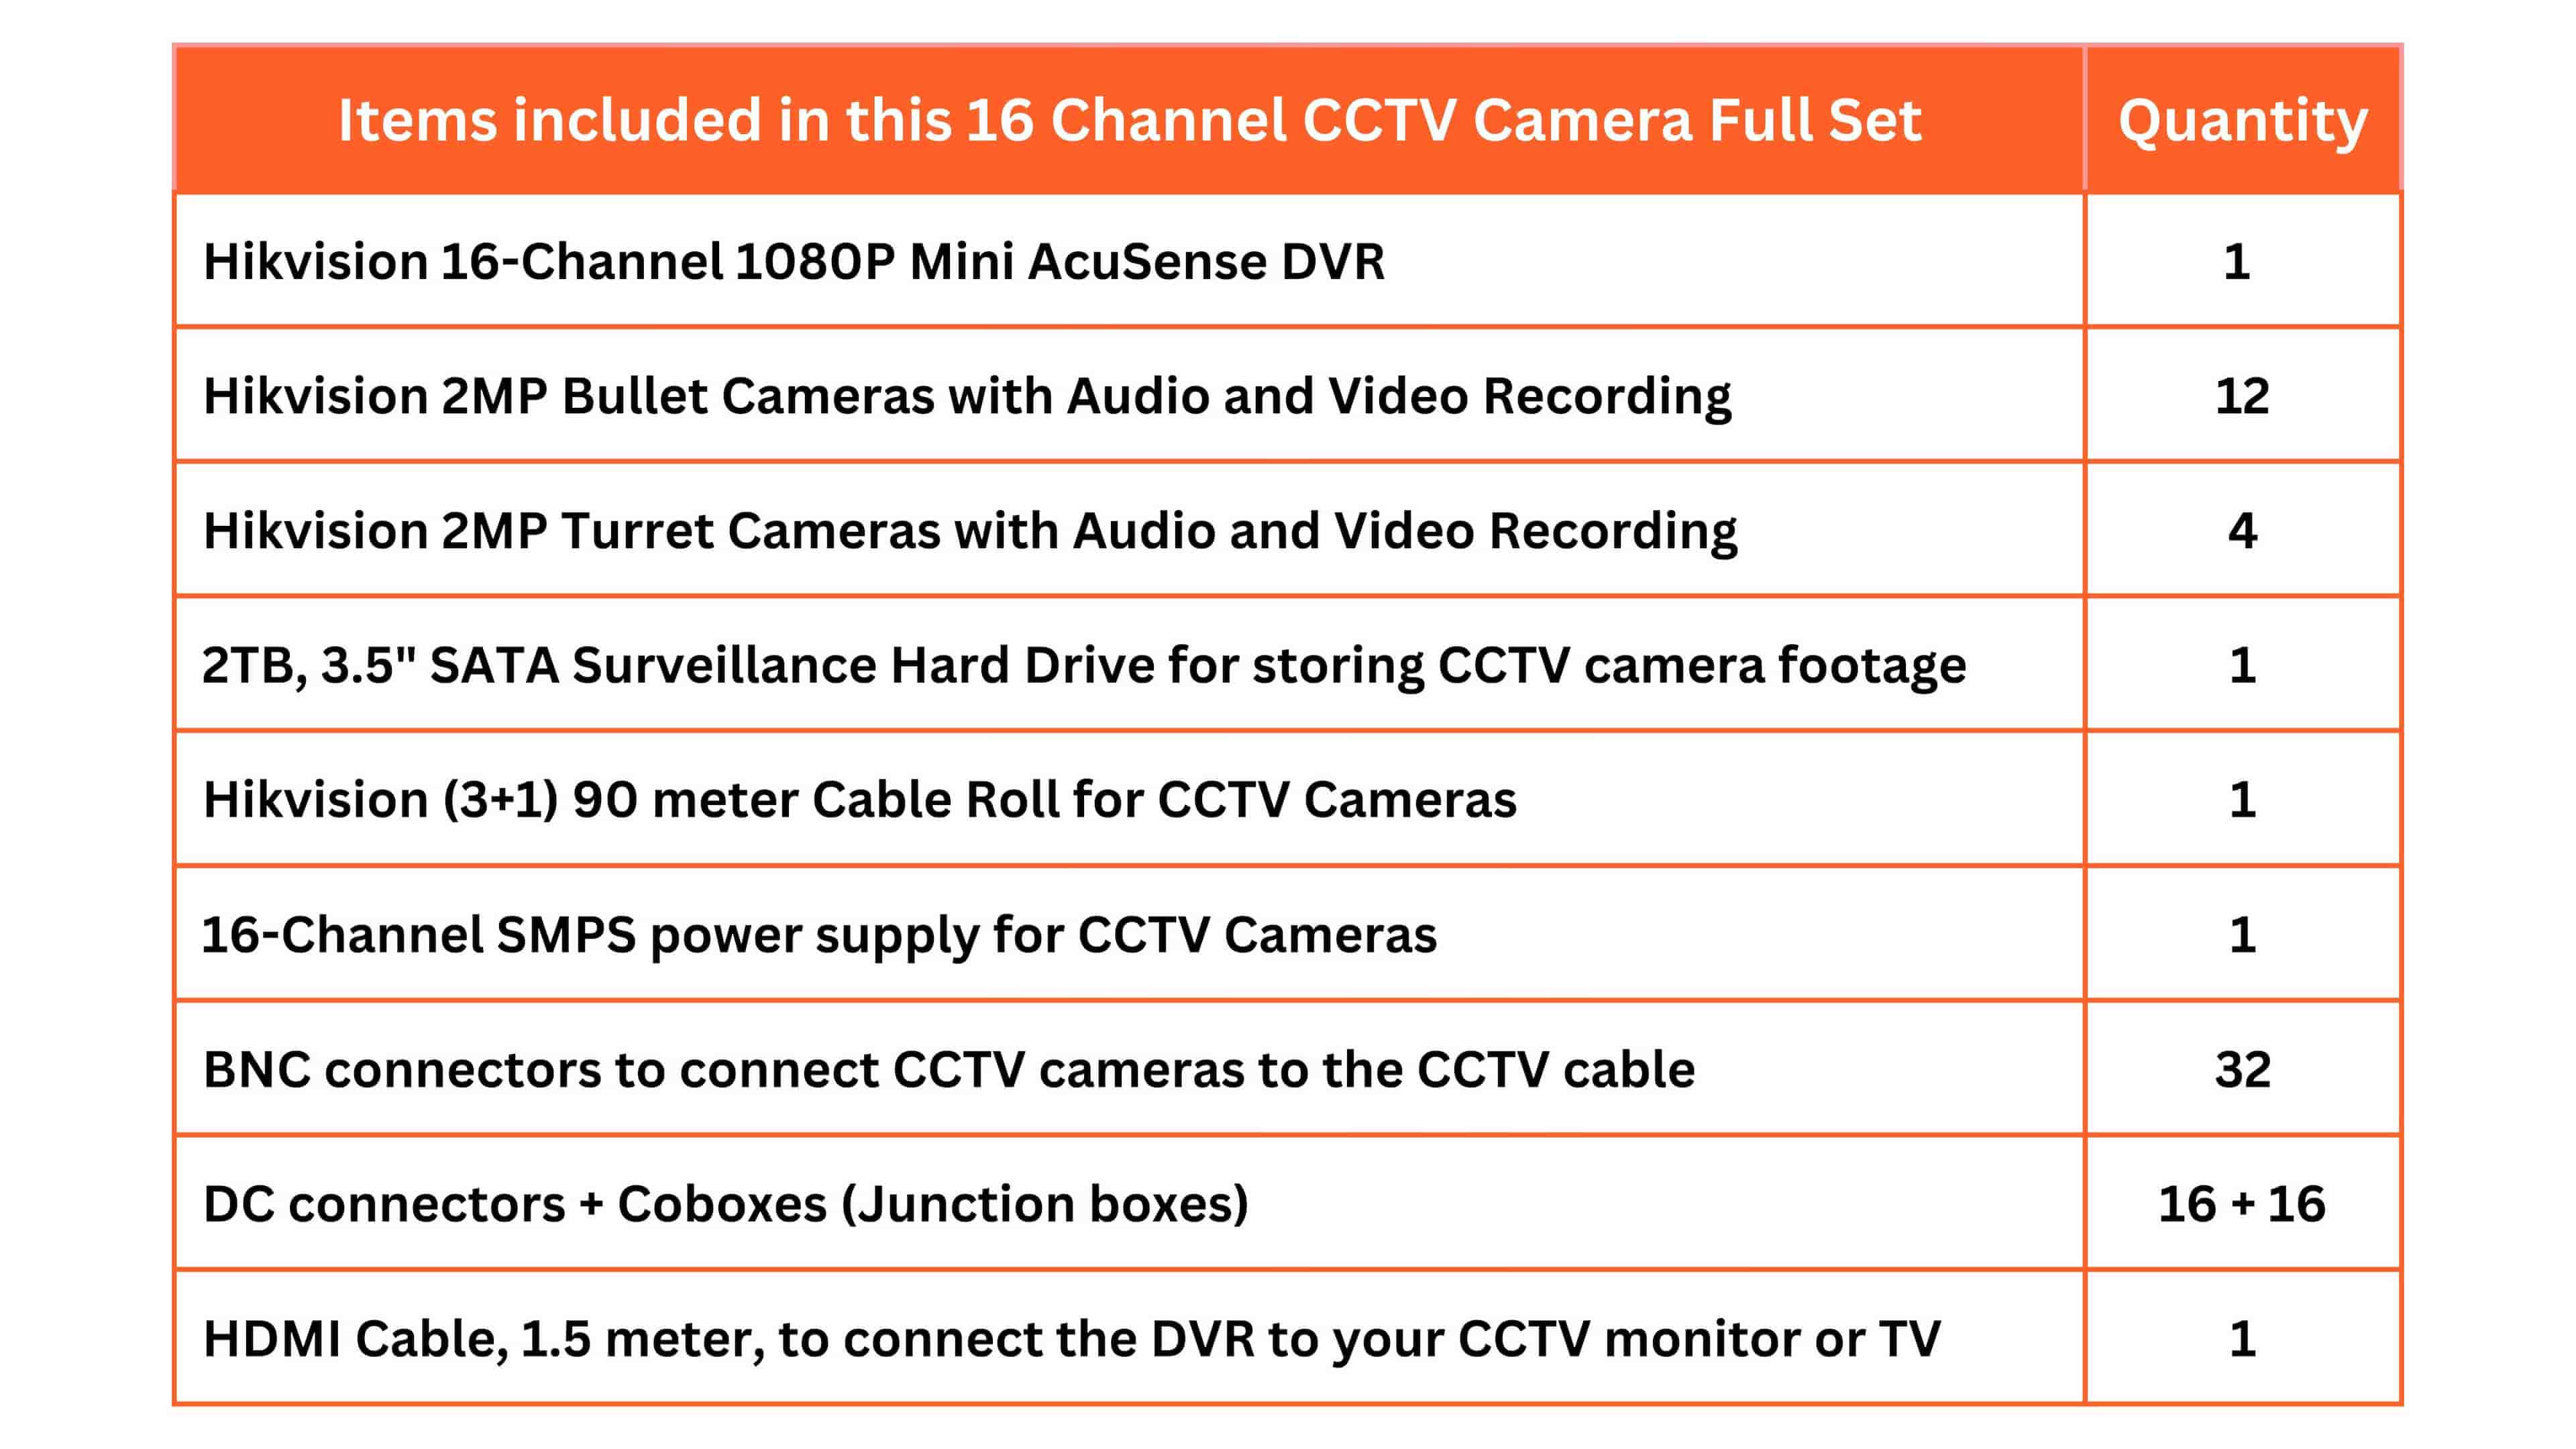 HIKVISION_16_Channel_CCTV_Full_Set_with_1080P_AcuSense_DVR_16x_2MP_Bullet_Turret_Cameras_2TB_HDD_Cable_Roll_16CH_SMPS_BNC_DC_Cobox_HDMI_Kit_Details